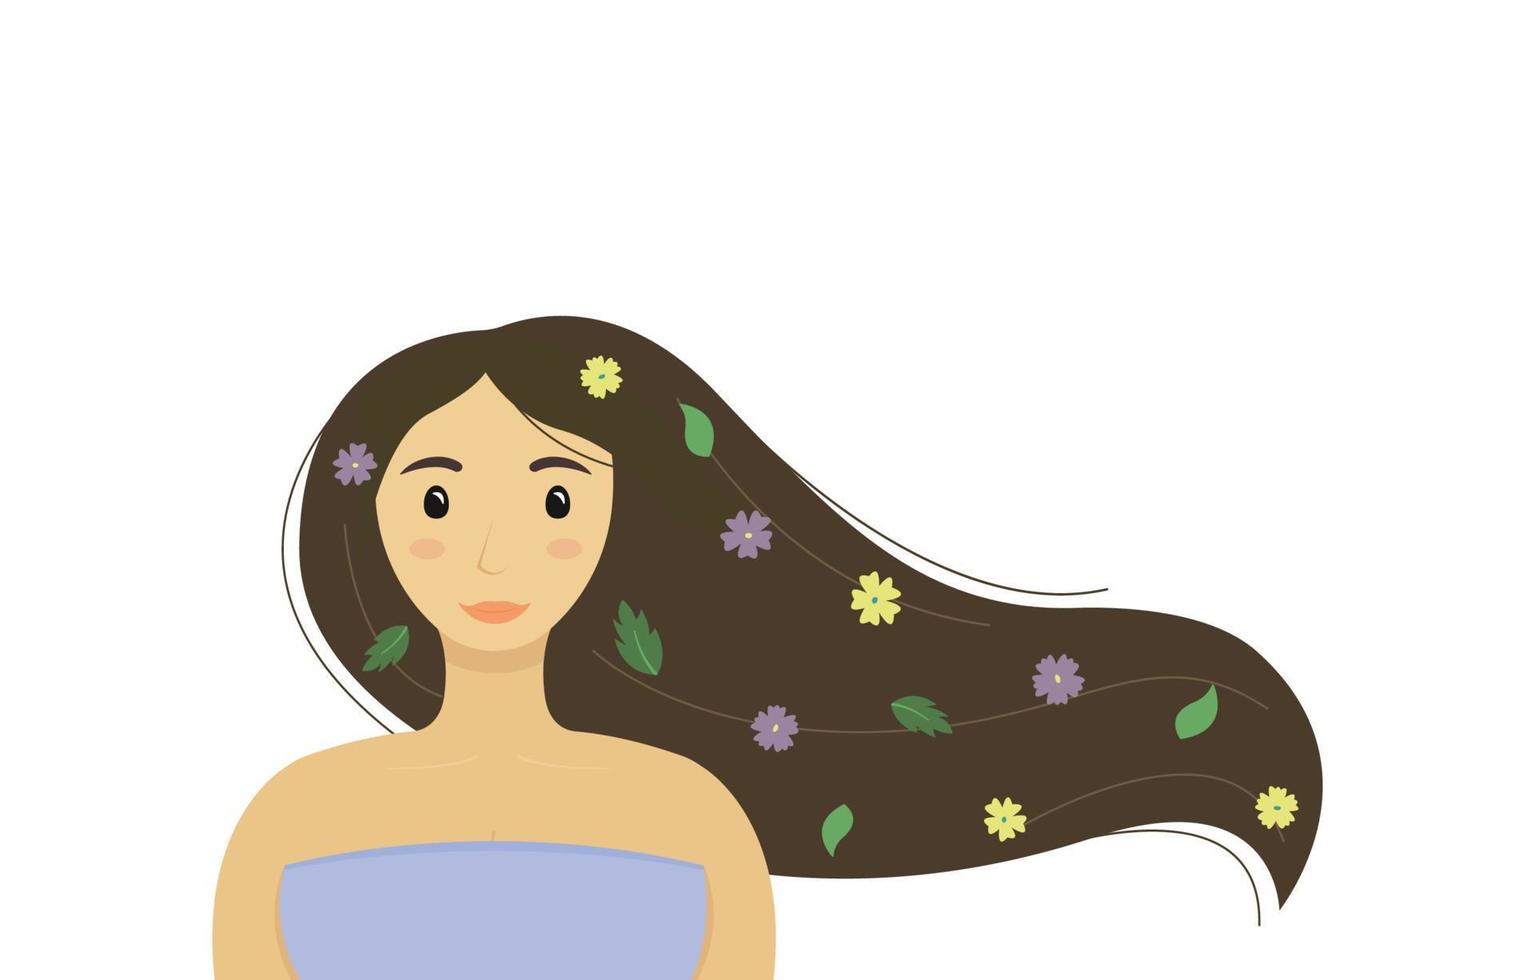 Tender young woman with long hair looking in full face. Hair fluttering in the wind, flowers and leaves in curls. Calm brunette with an open look. Flat vector illustration